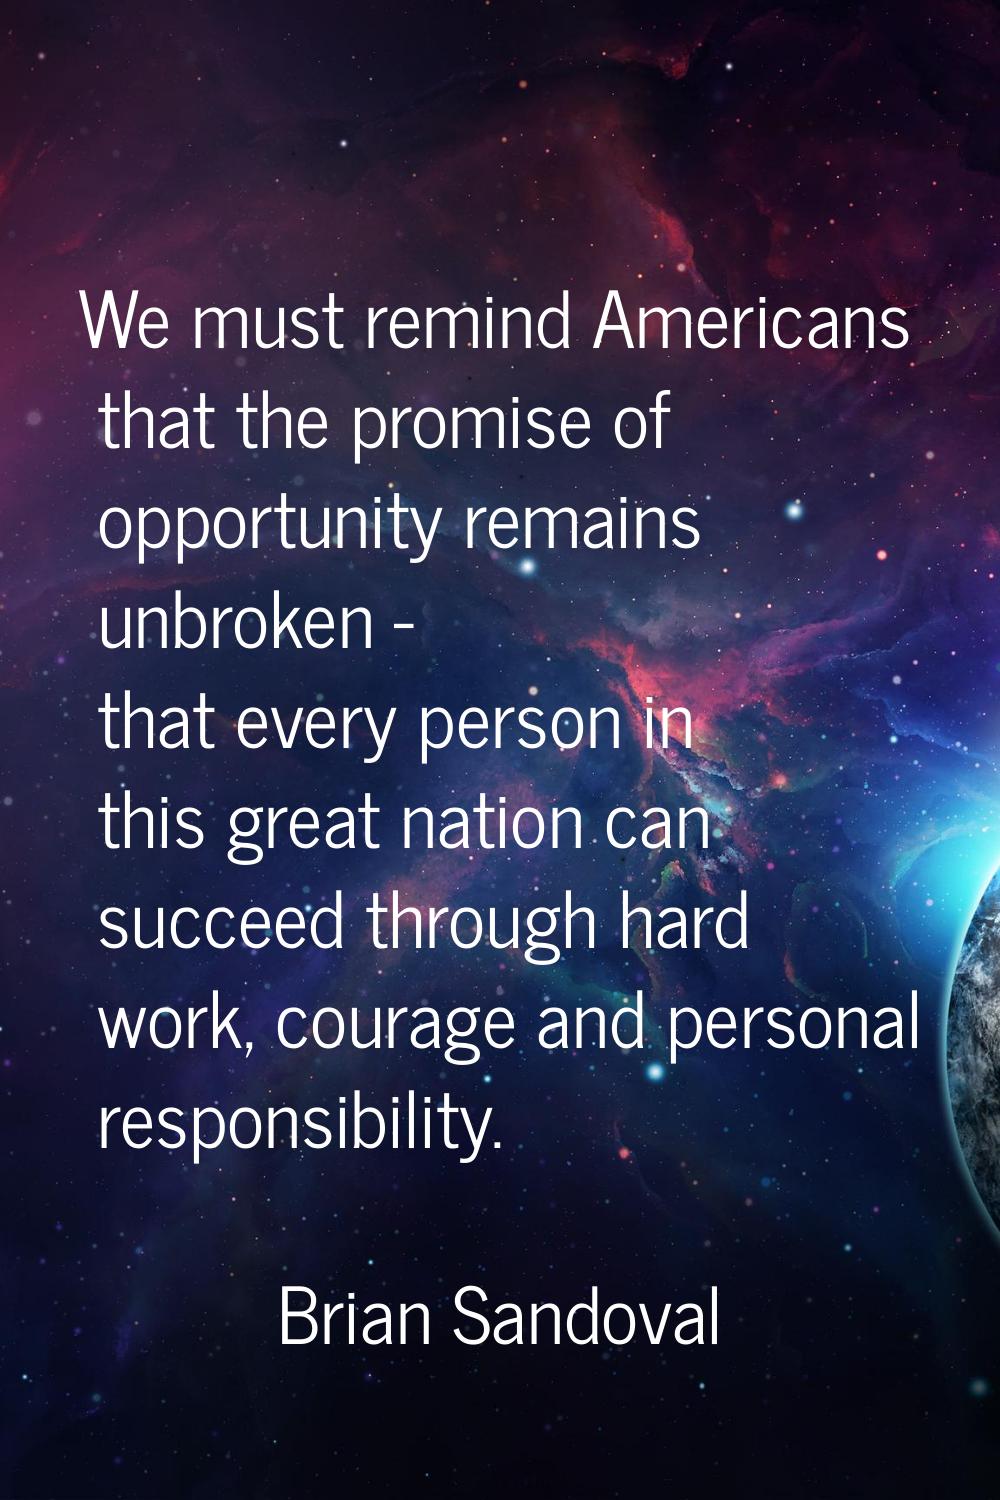 We must remind Americans that the promise of opportunity remains unbroken - that every person in th